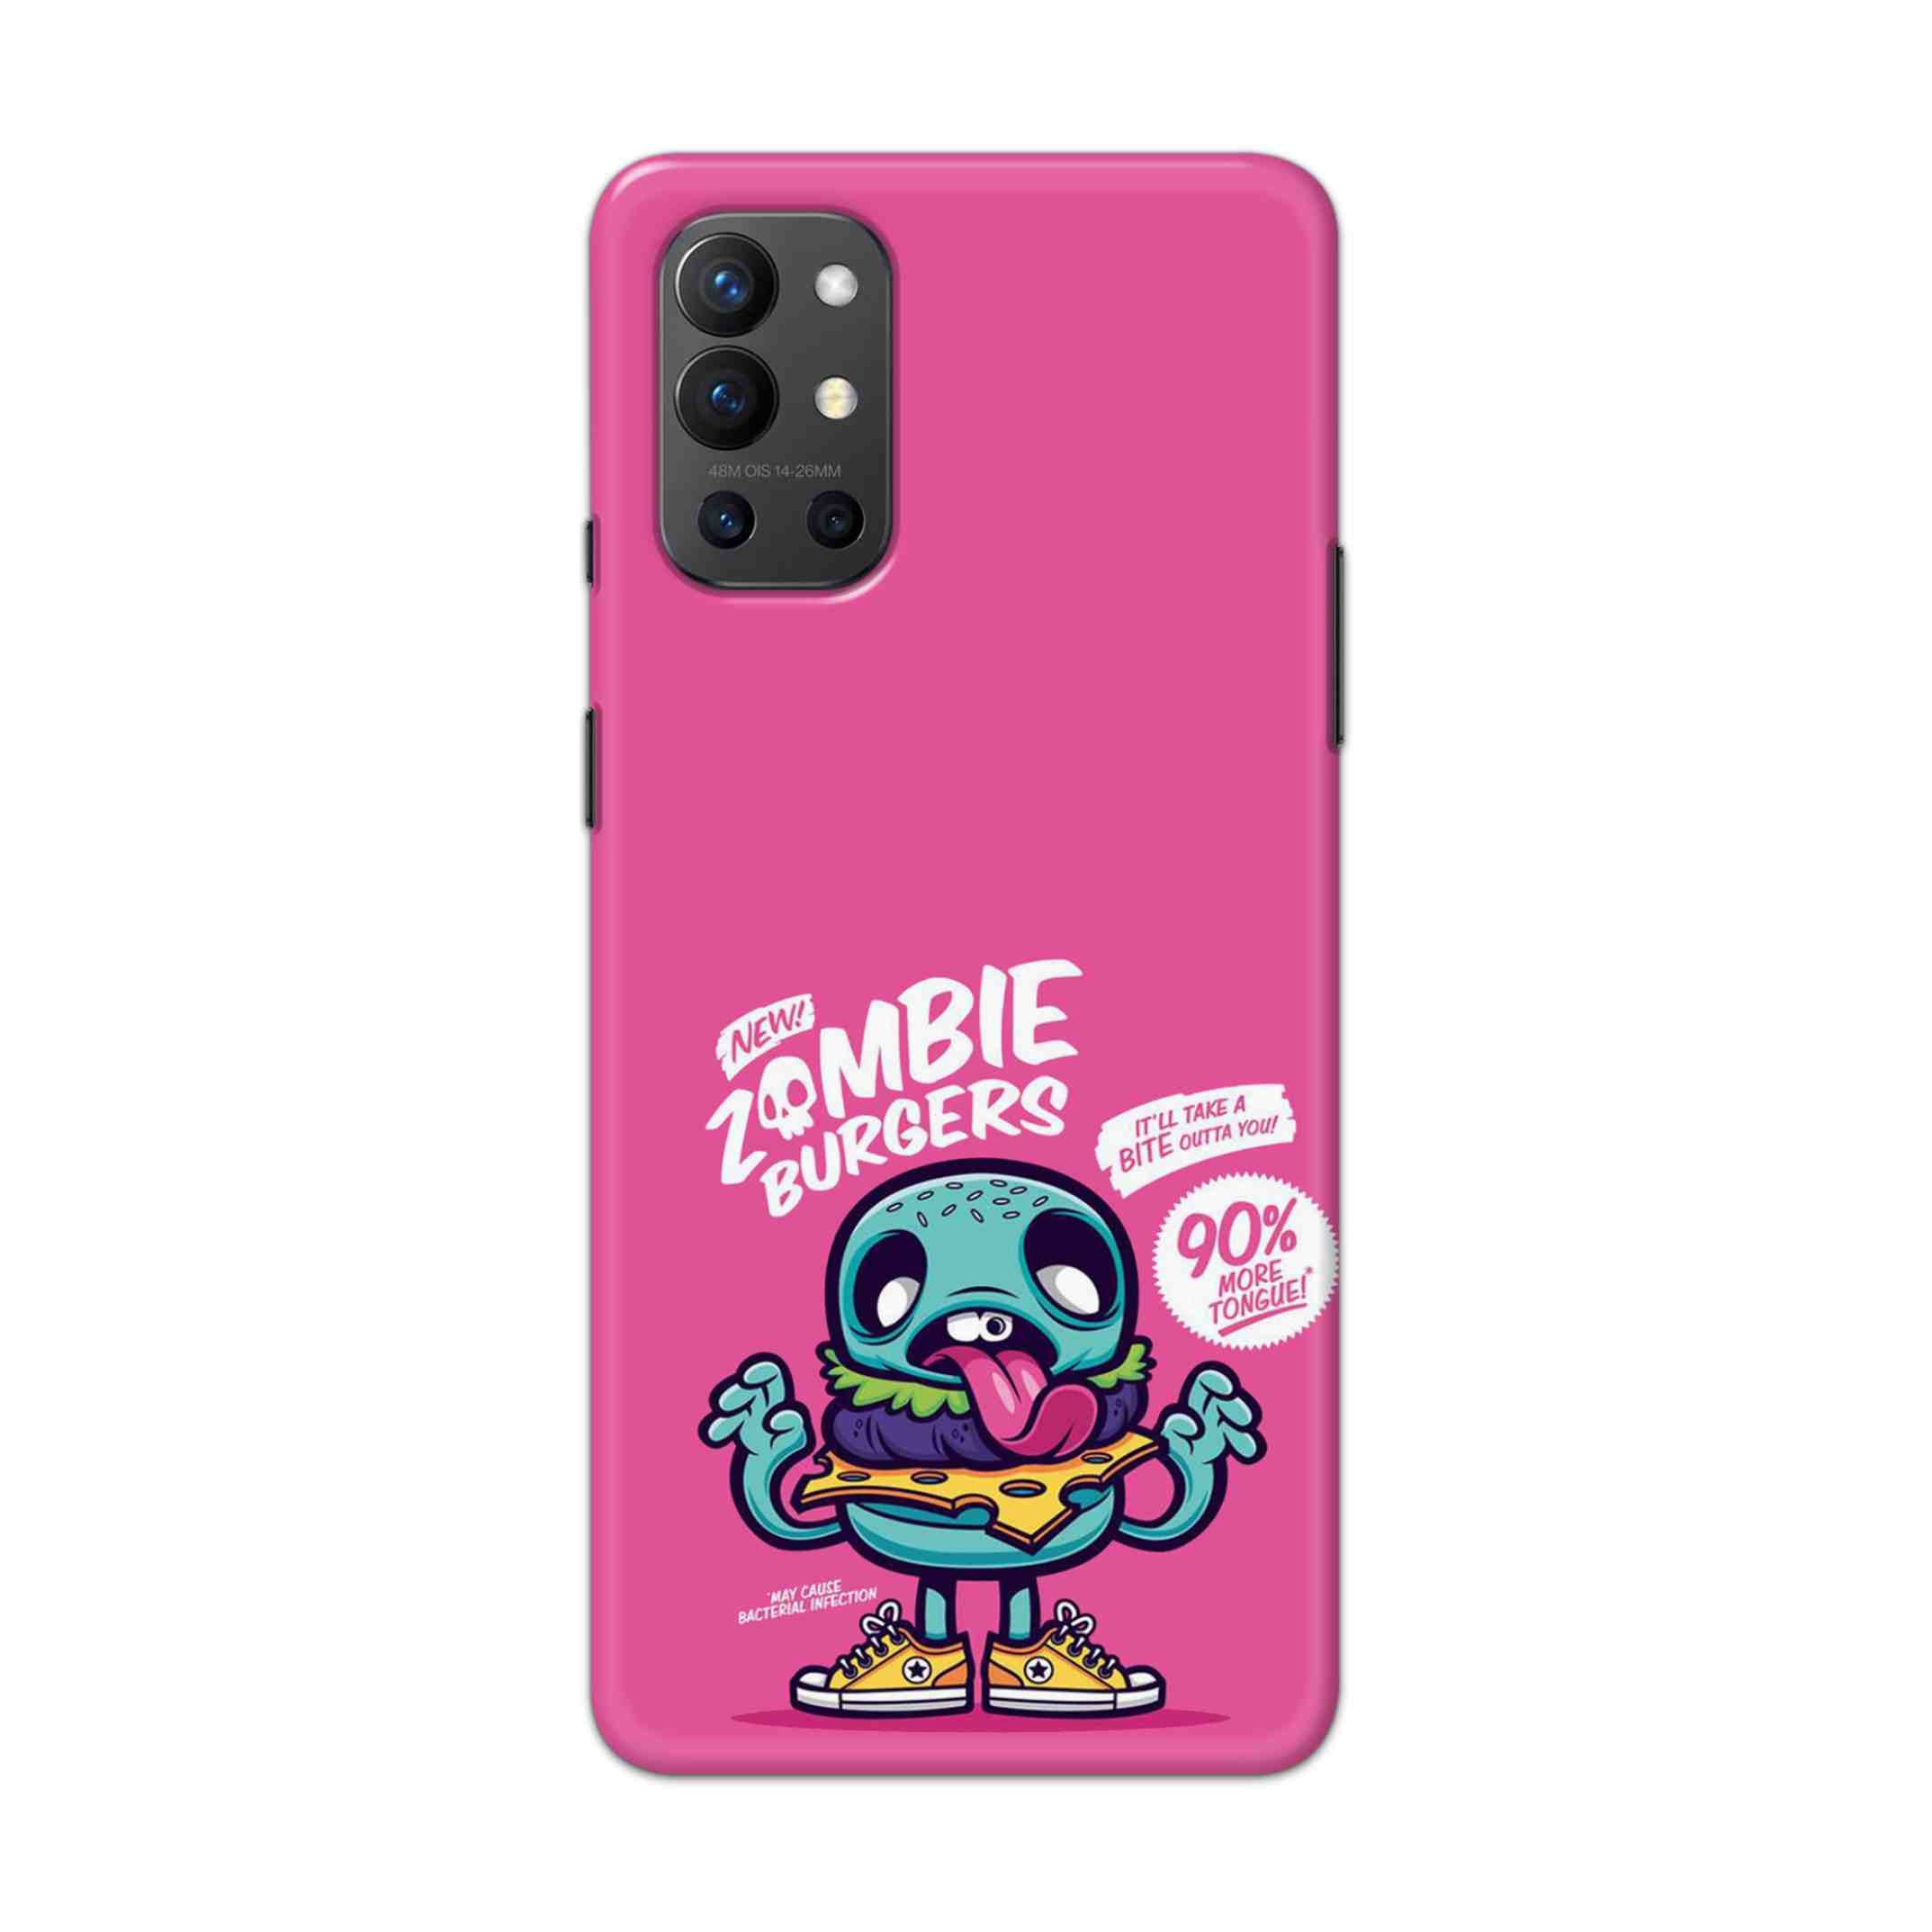 Buy New Zombie Burgers Hard Back Mobile Phone Case Cover For OnePlus 9R / 8T Online